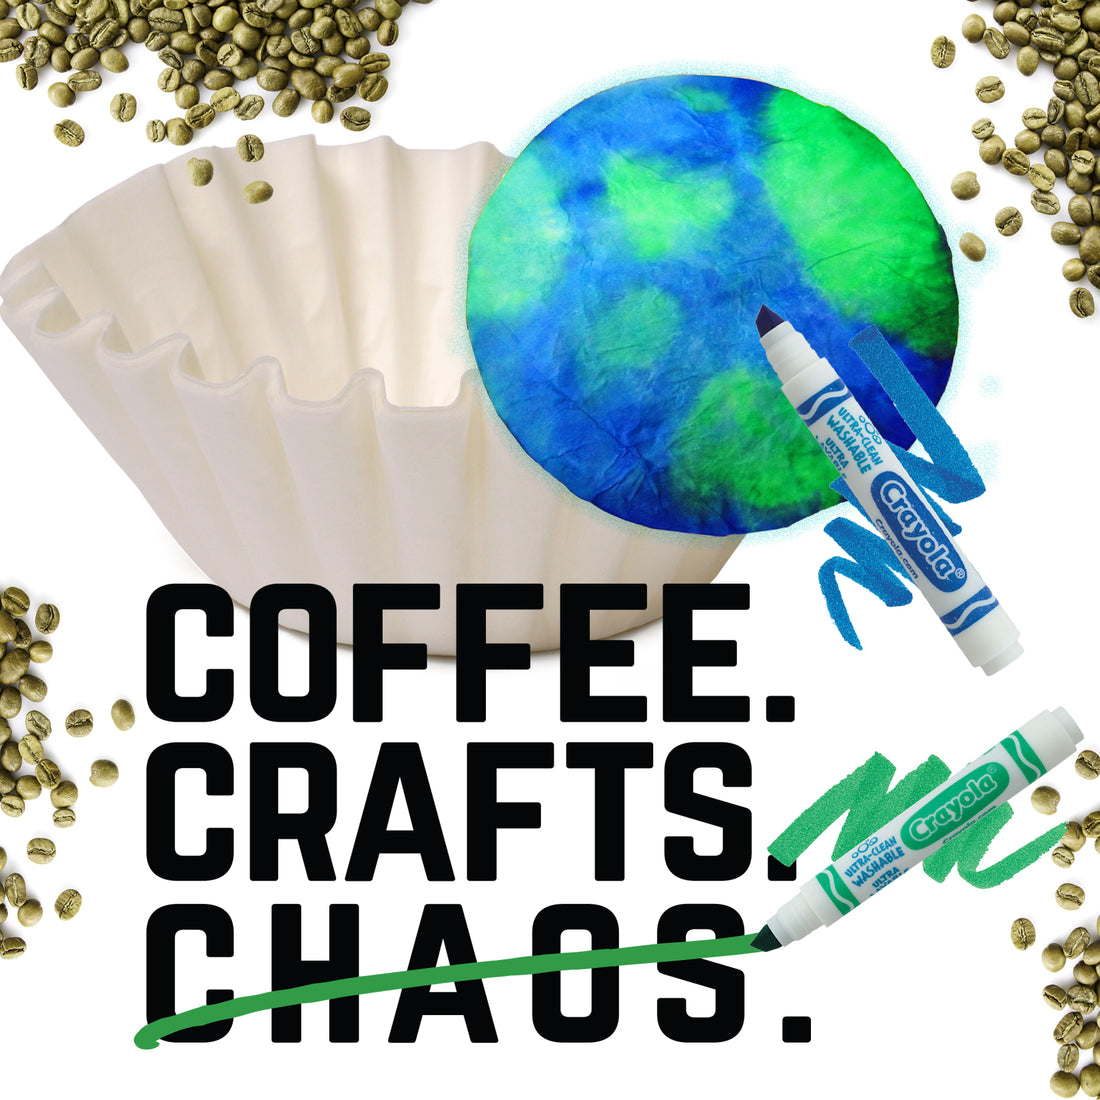 COFFEE FILTER PLANET EARTH CRAFT FOR KIDS